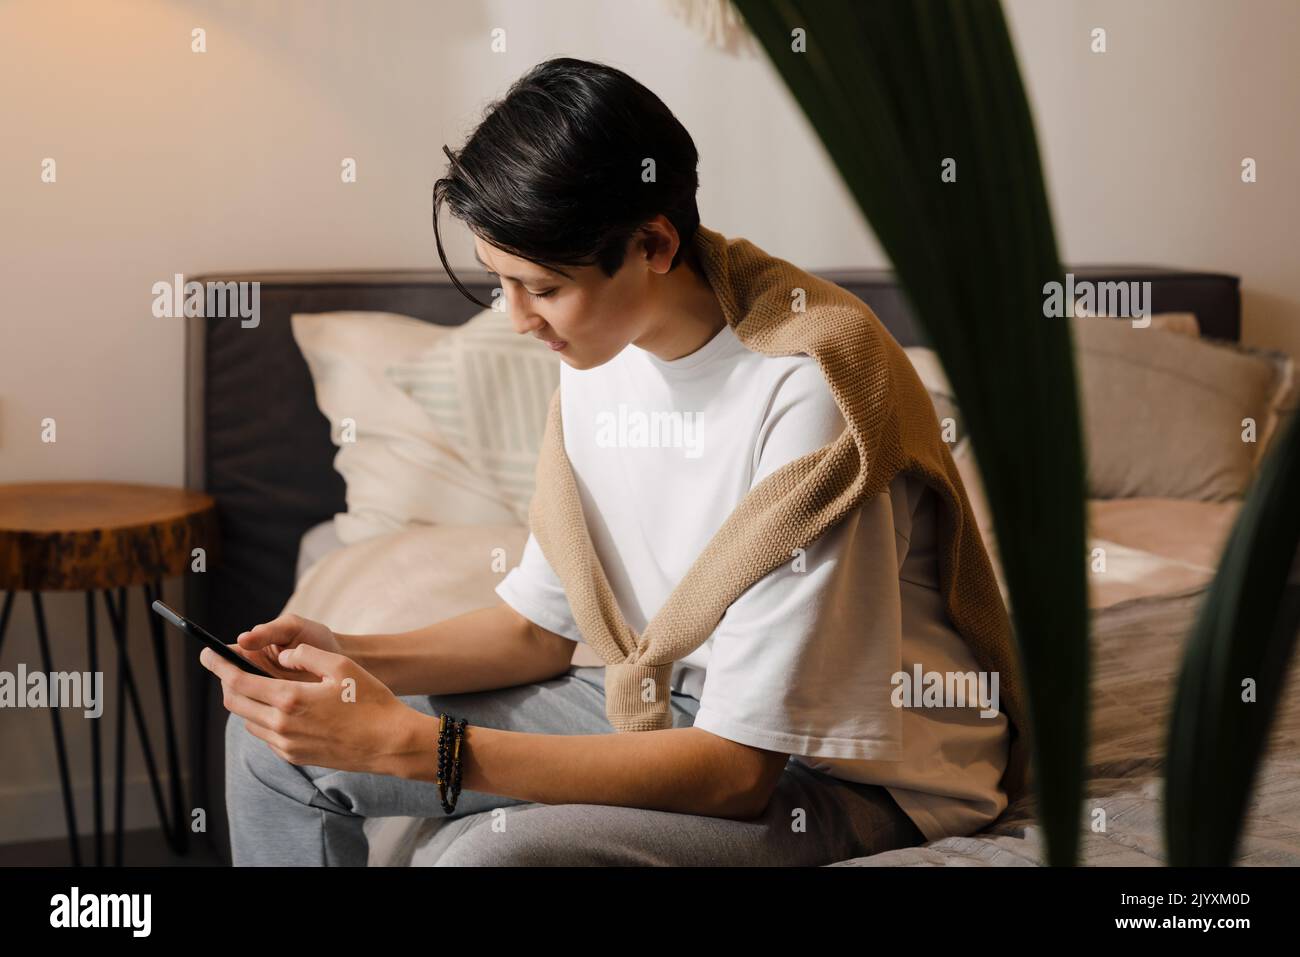 Asian boy using mobile phone while sitting on bed at home Stock Photo